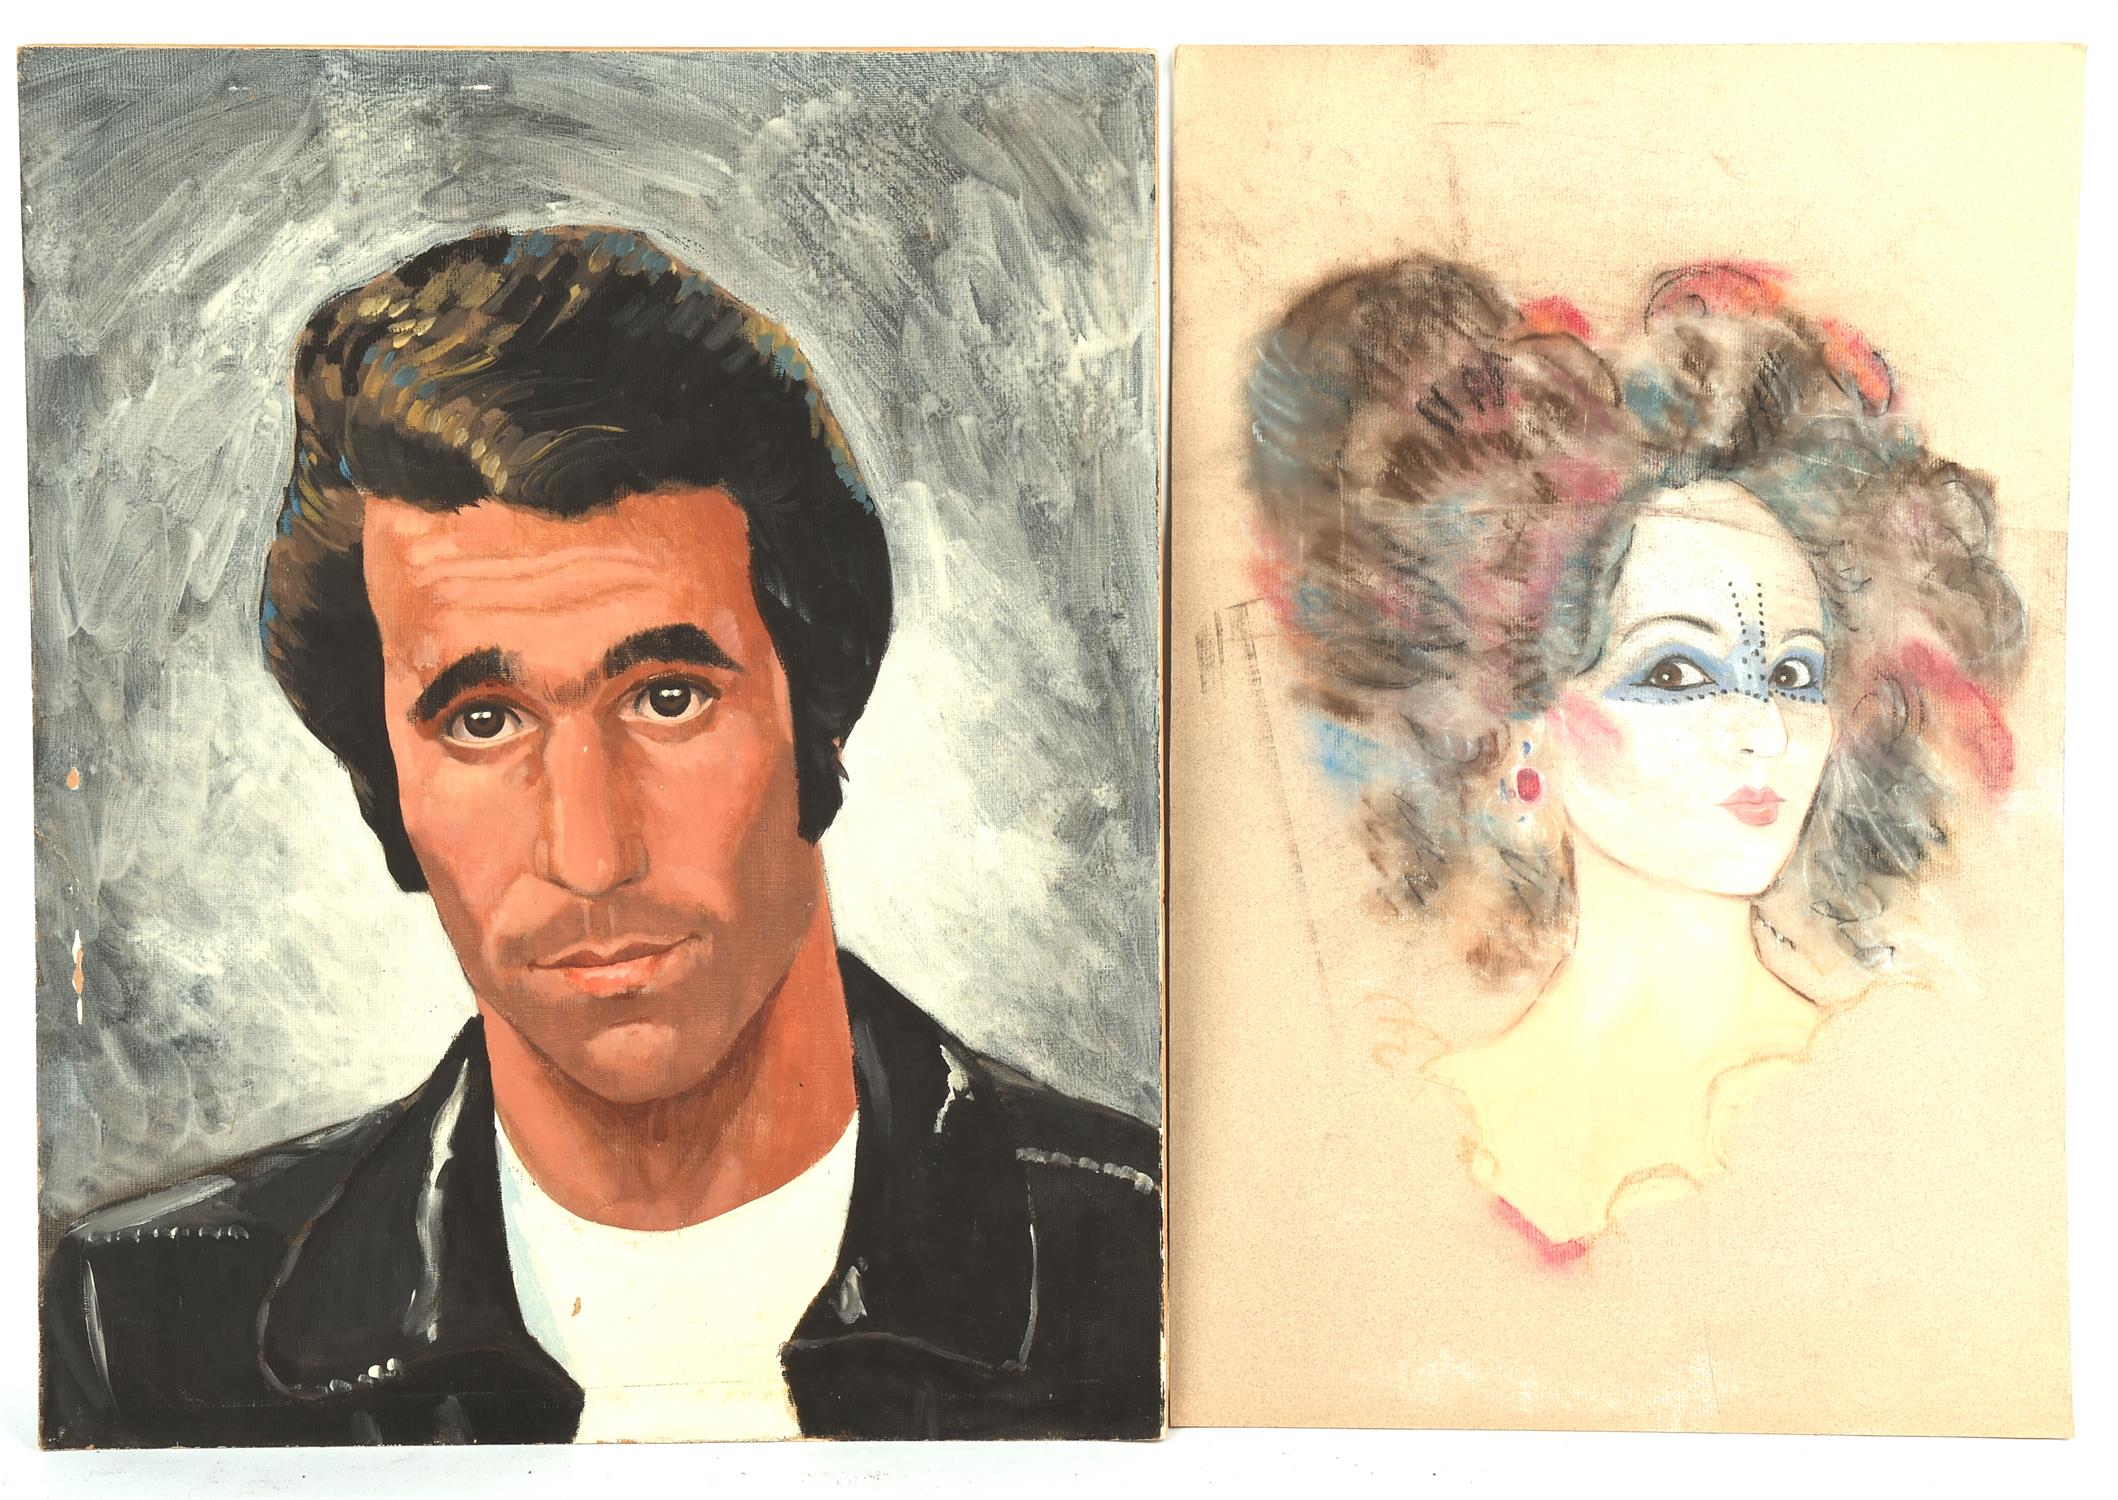 Collection of artworks of popular culture figures from Film, TV and Music. Artists unknown. - Image 4 of 4